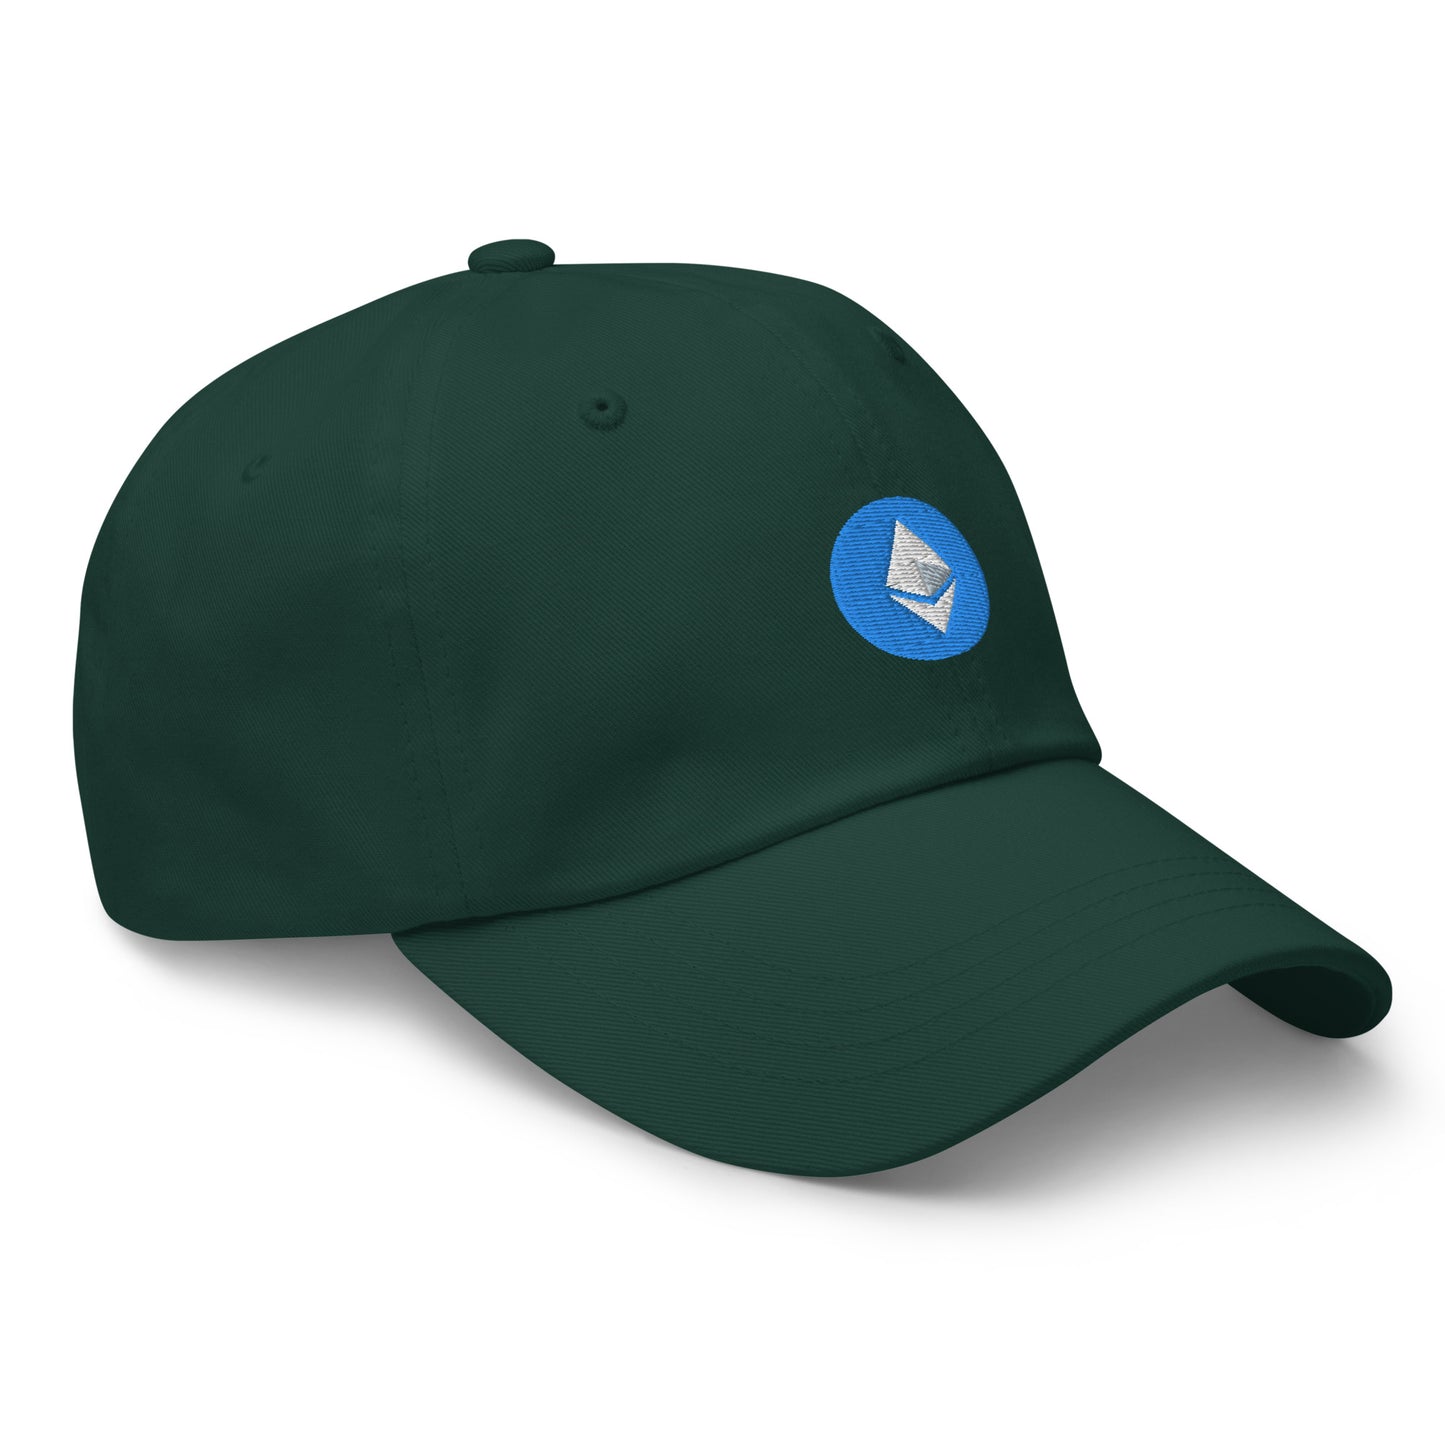 Ethereum (ETH) - Fitted baseball cap